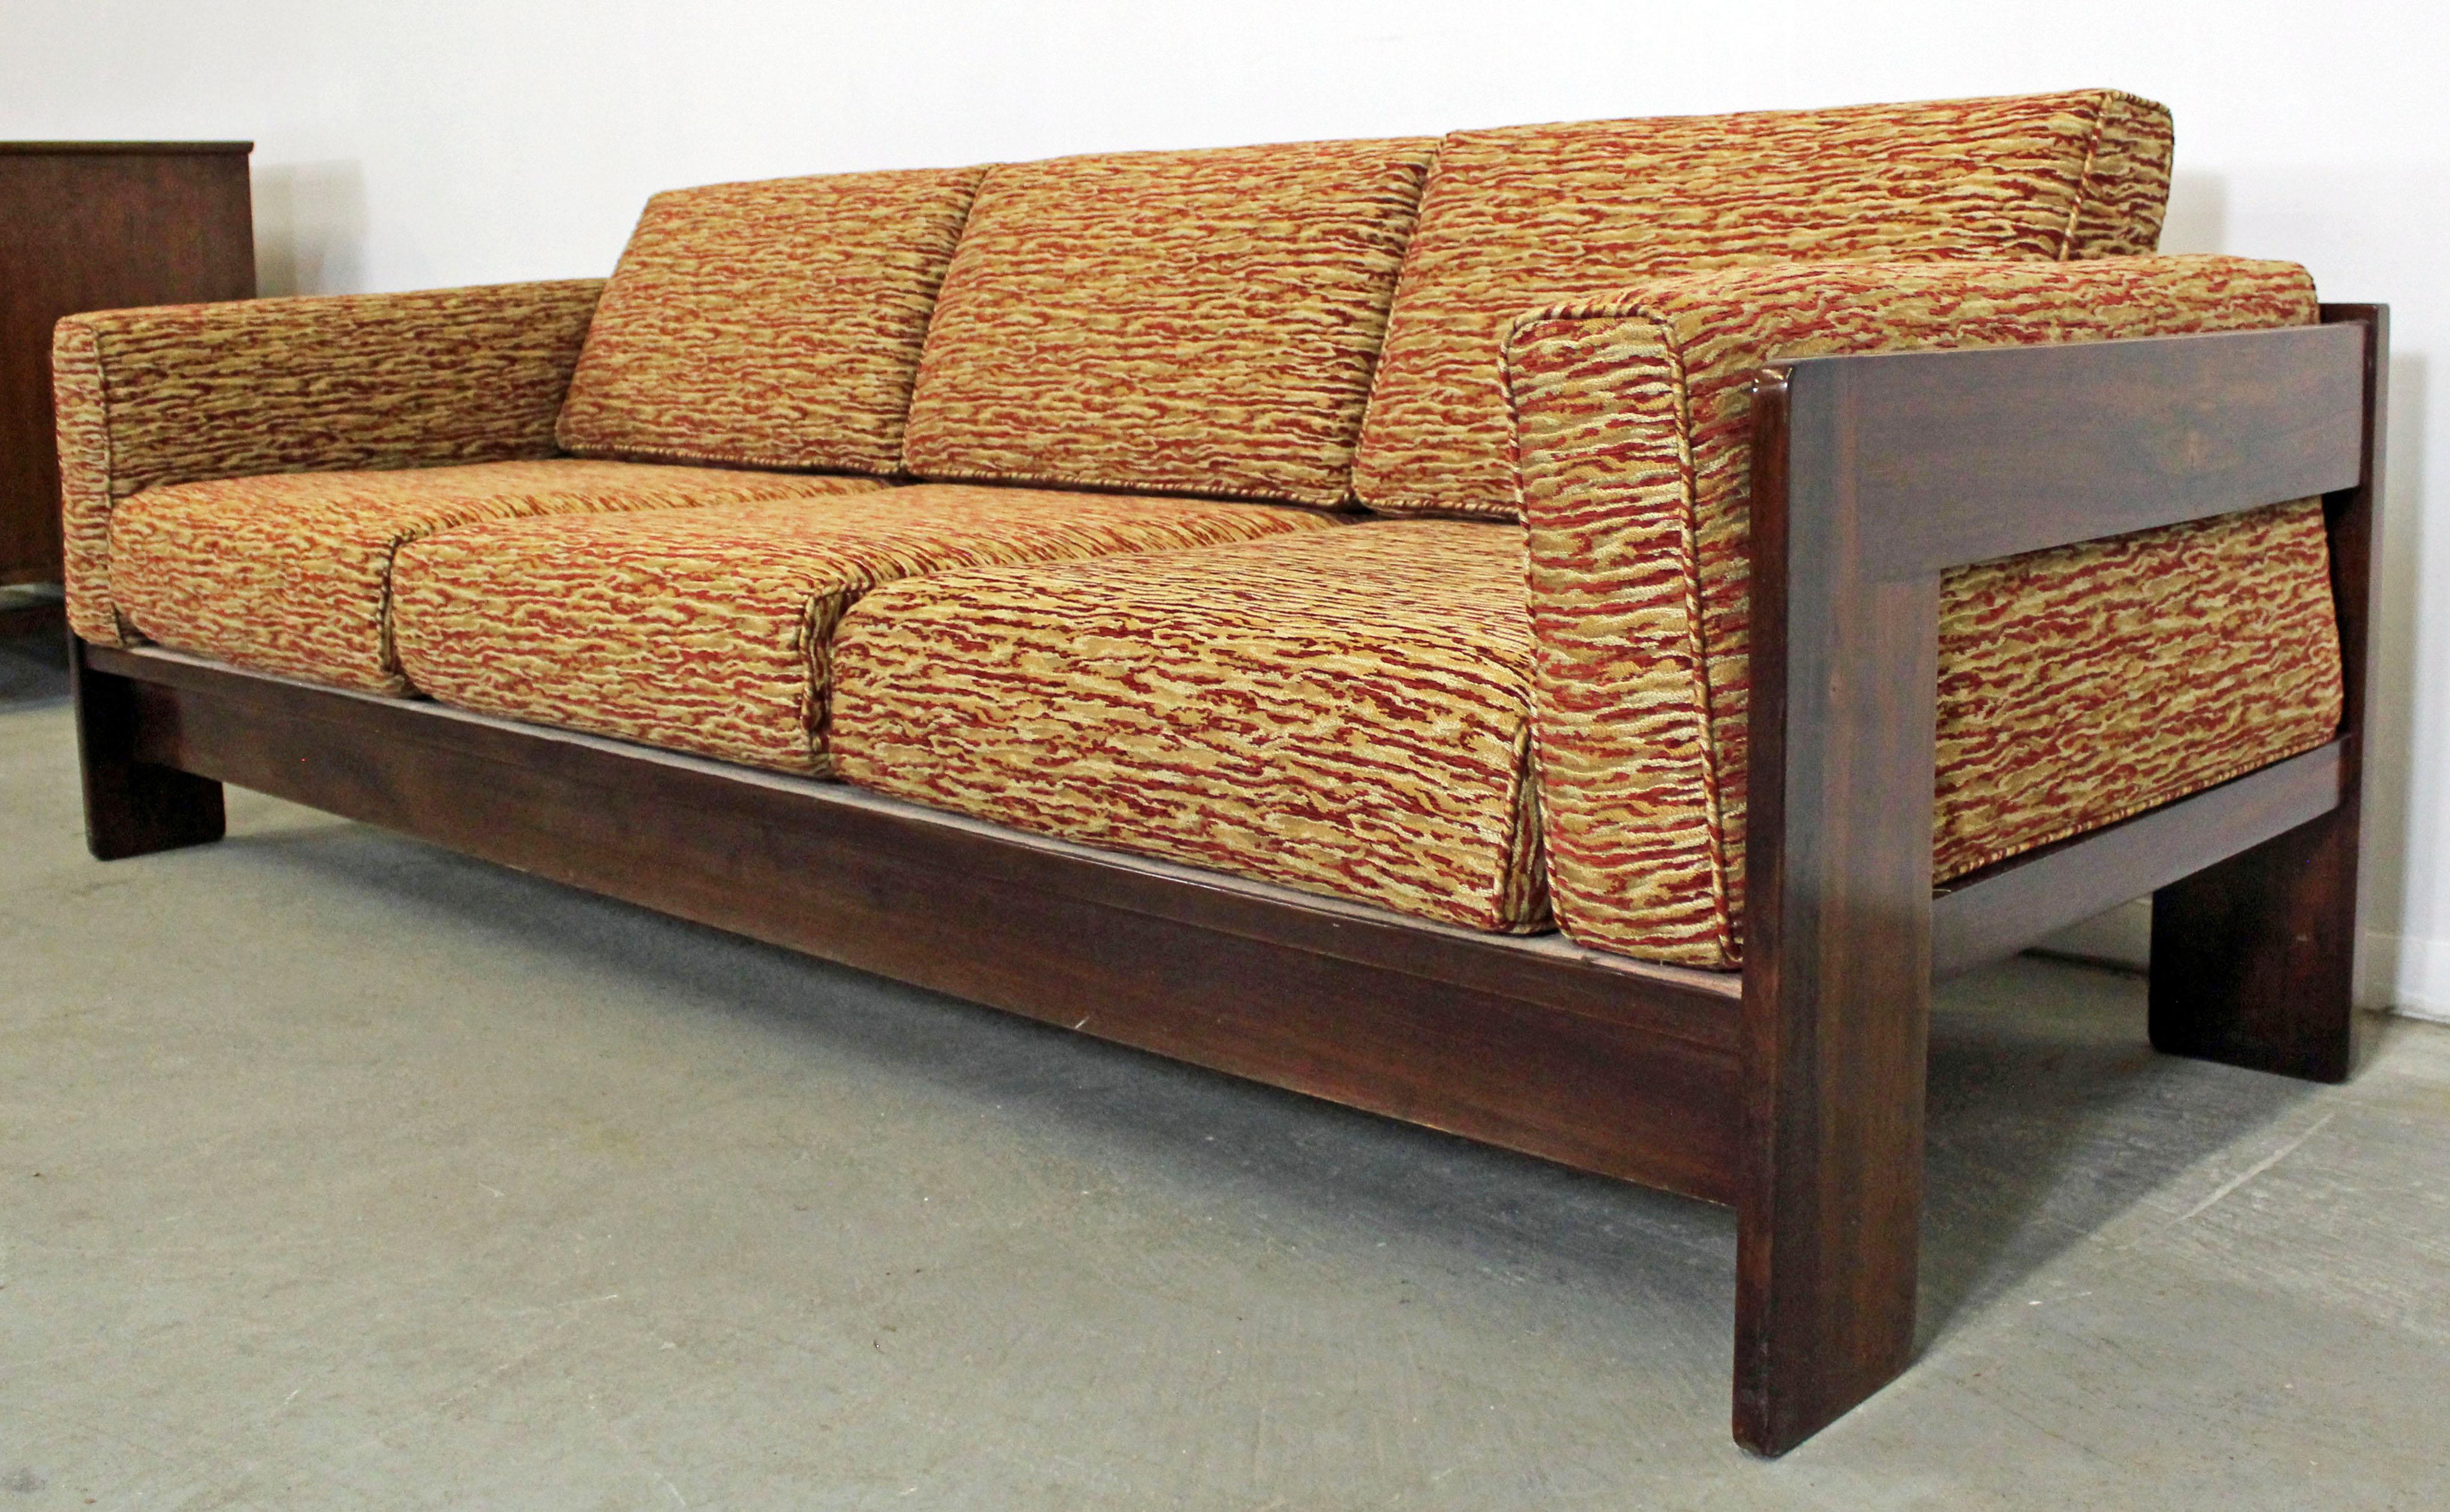 What a find. Offered is a Mid-Century Modern rosewood three-seat sofa. This is the 